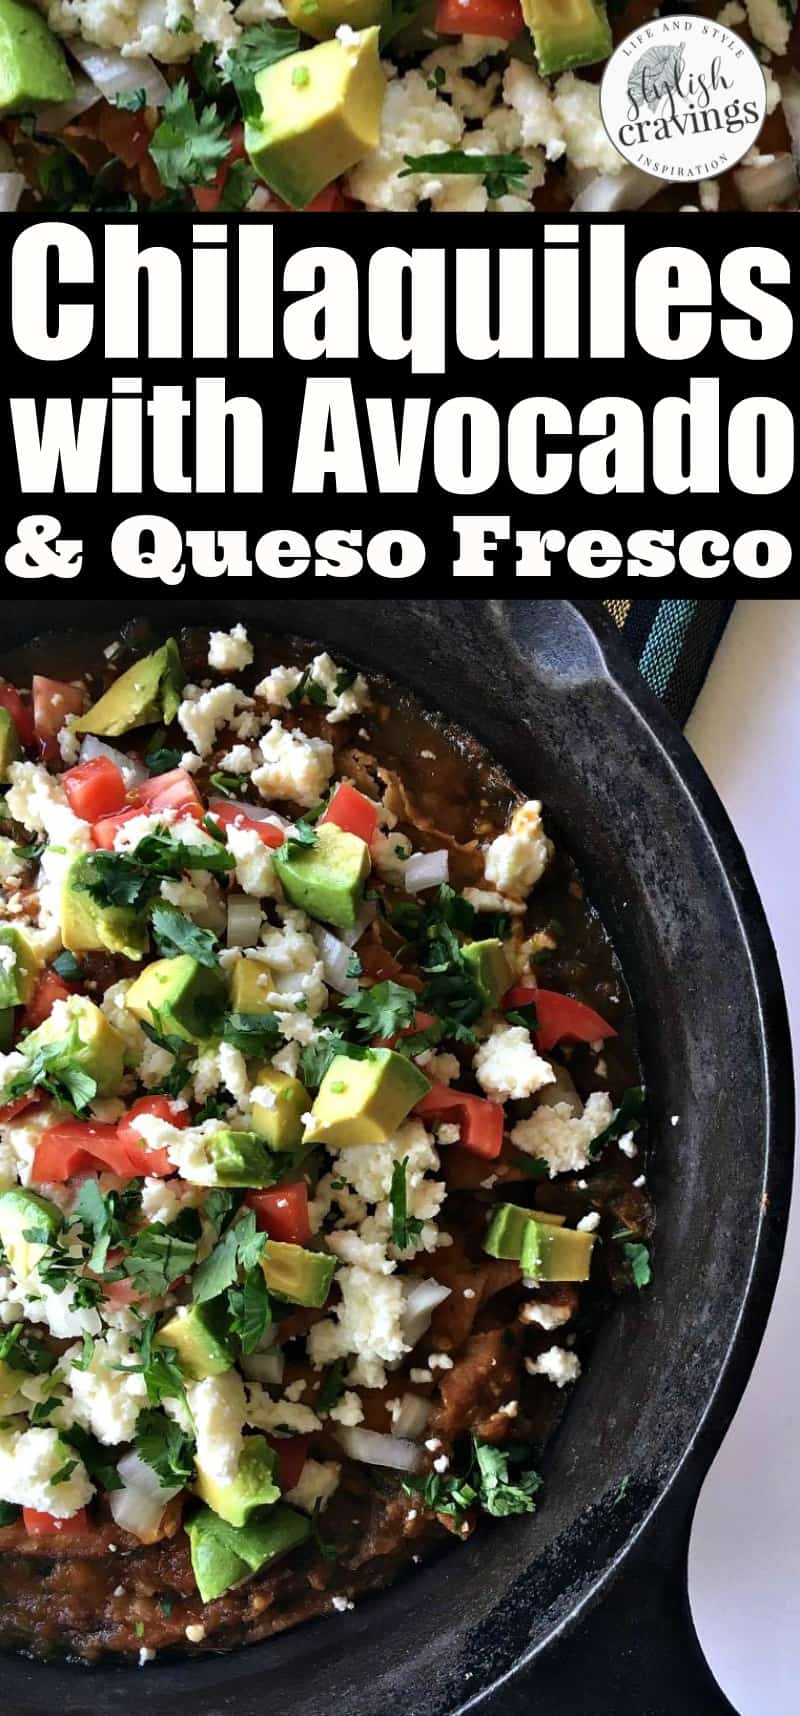 Chilaquiles With Avocados & Queso Fresco